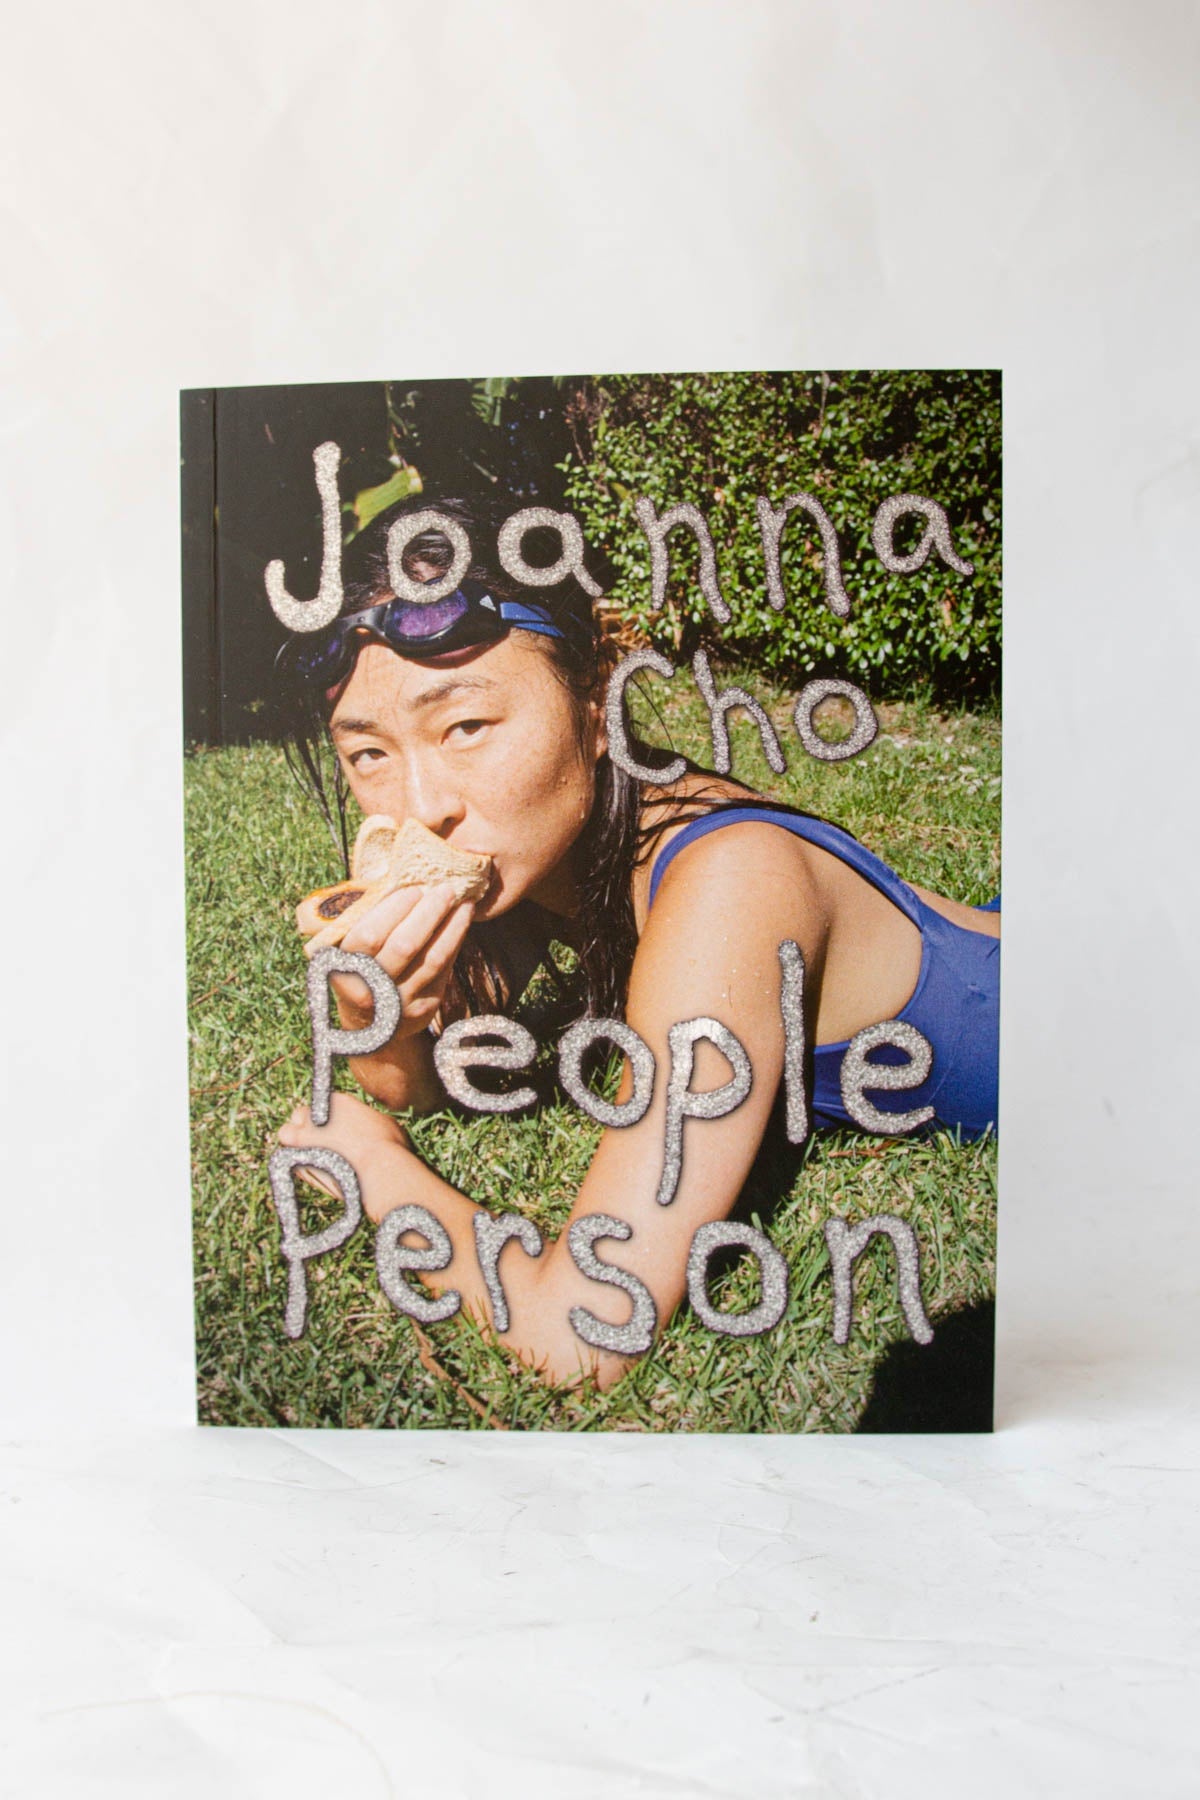 People Person by Joanna Cho